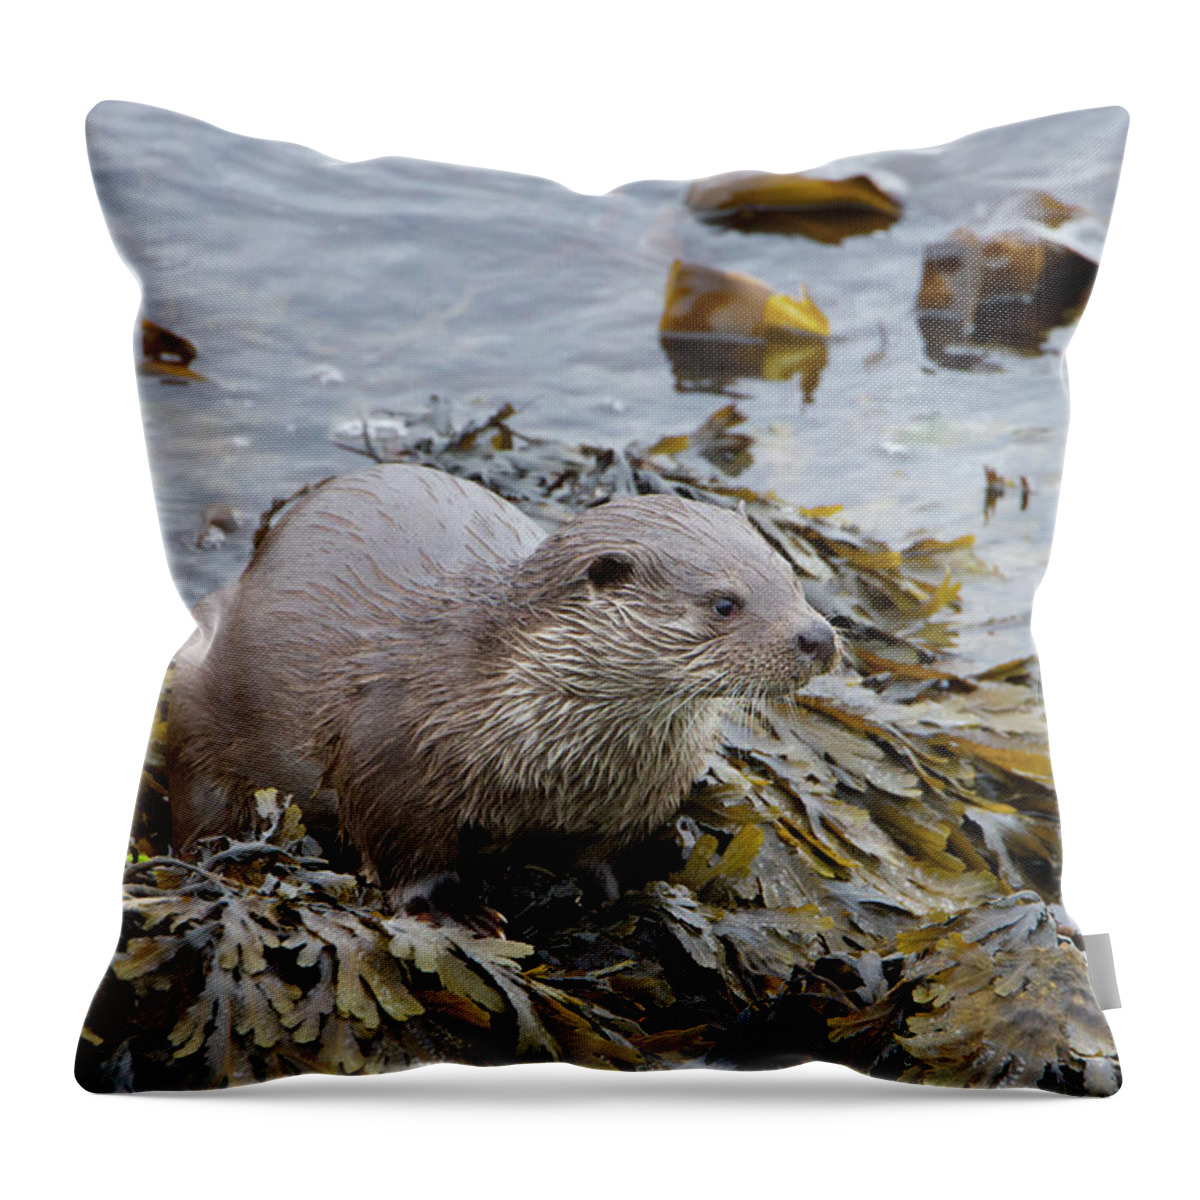 Otter Throw Pillow featuring the photograph Otter On Seaweed by Pete Walkden